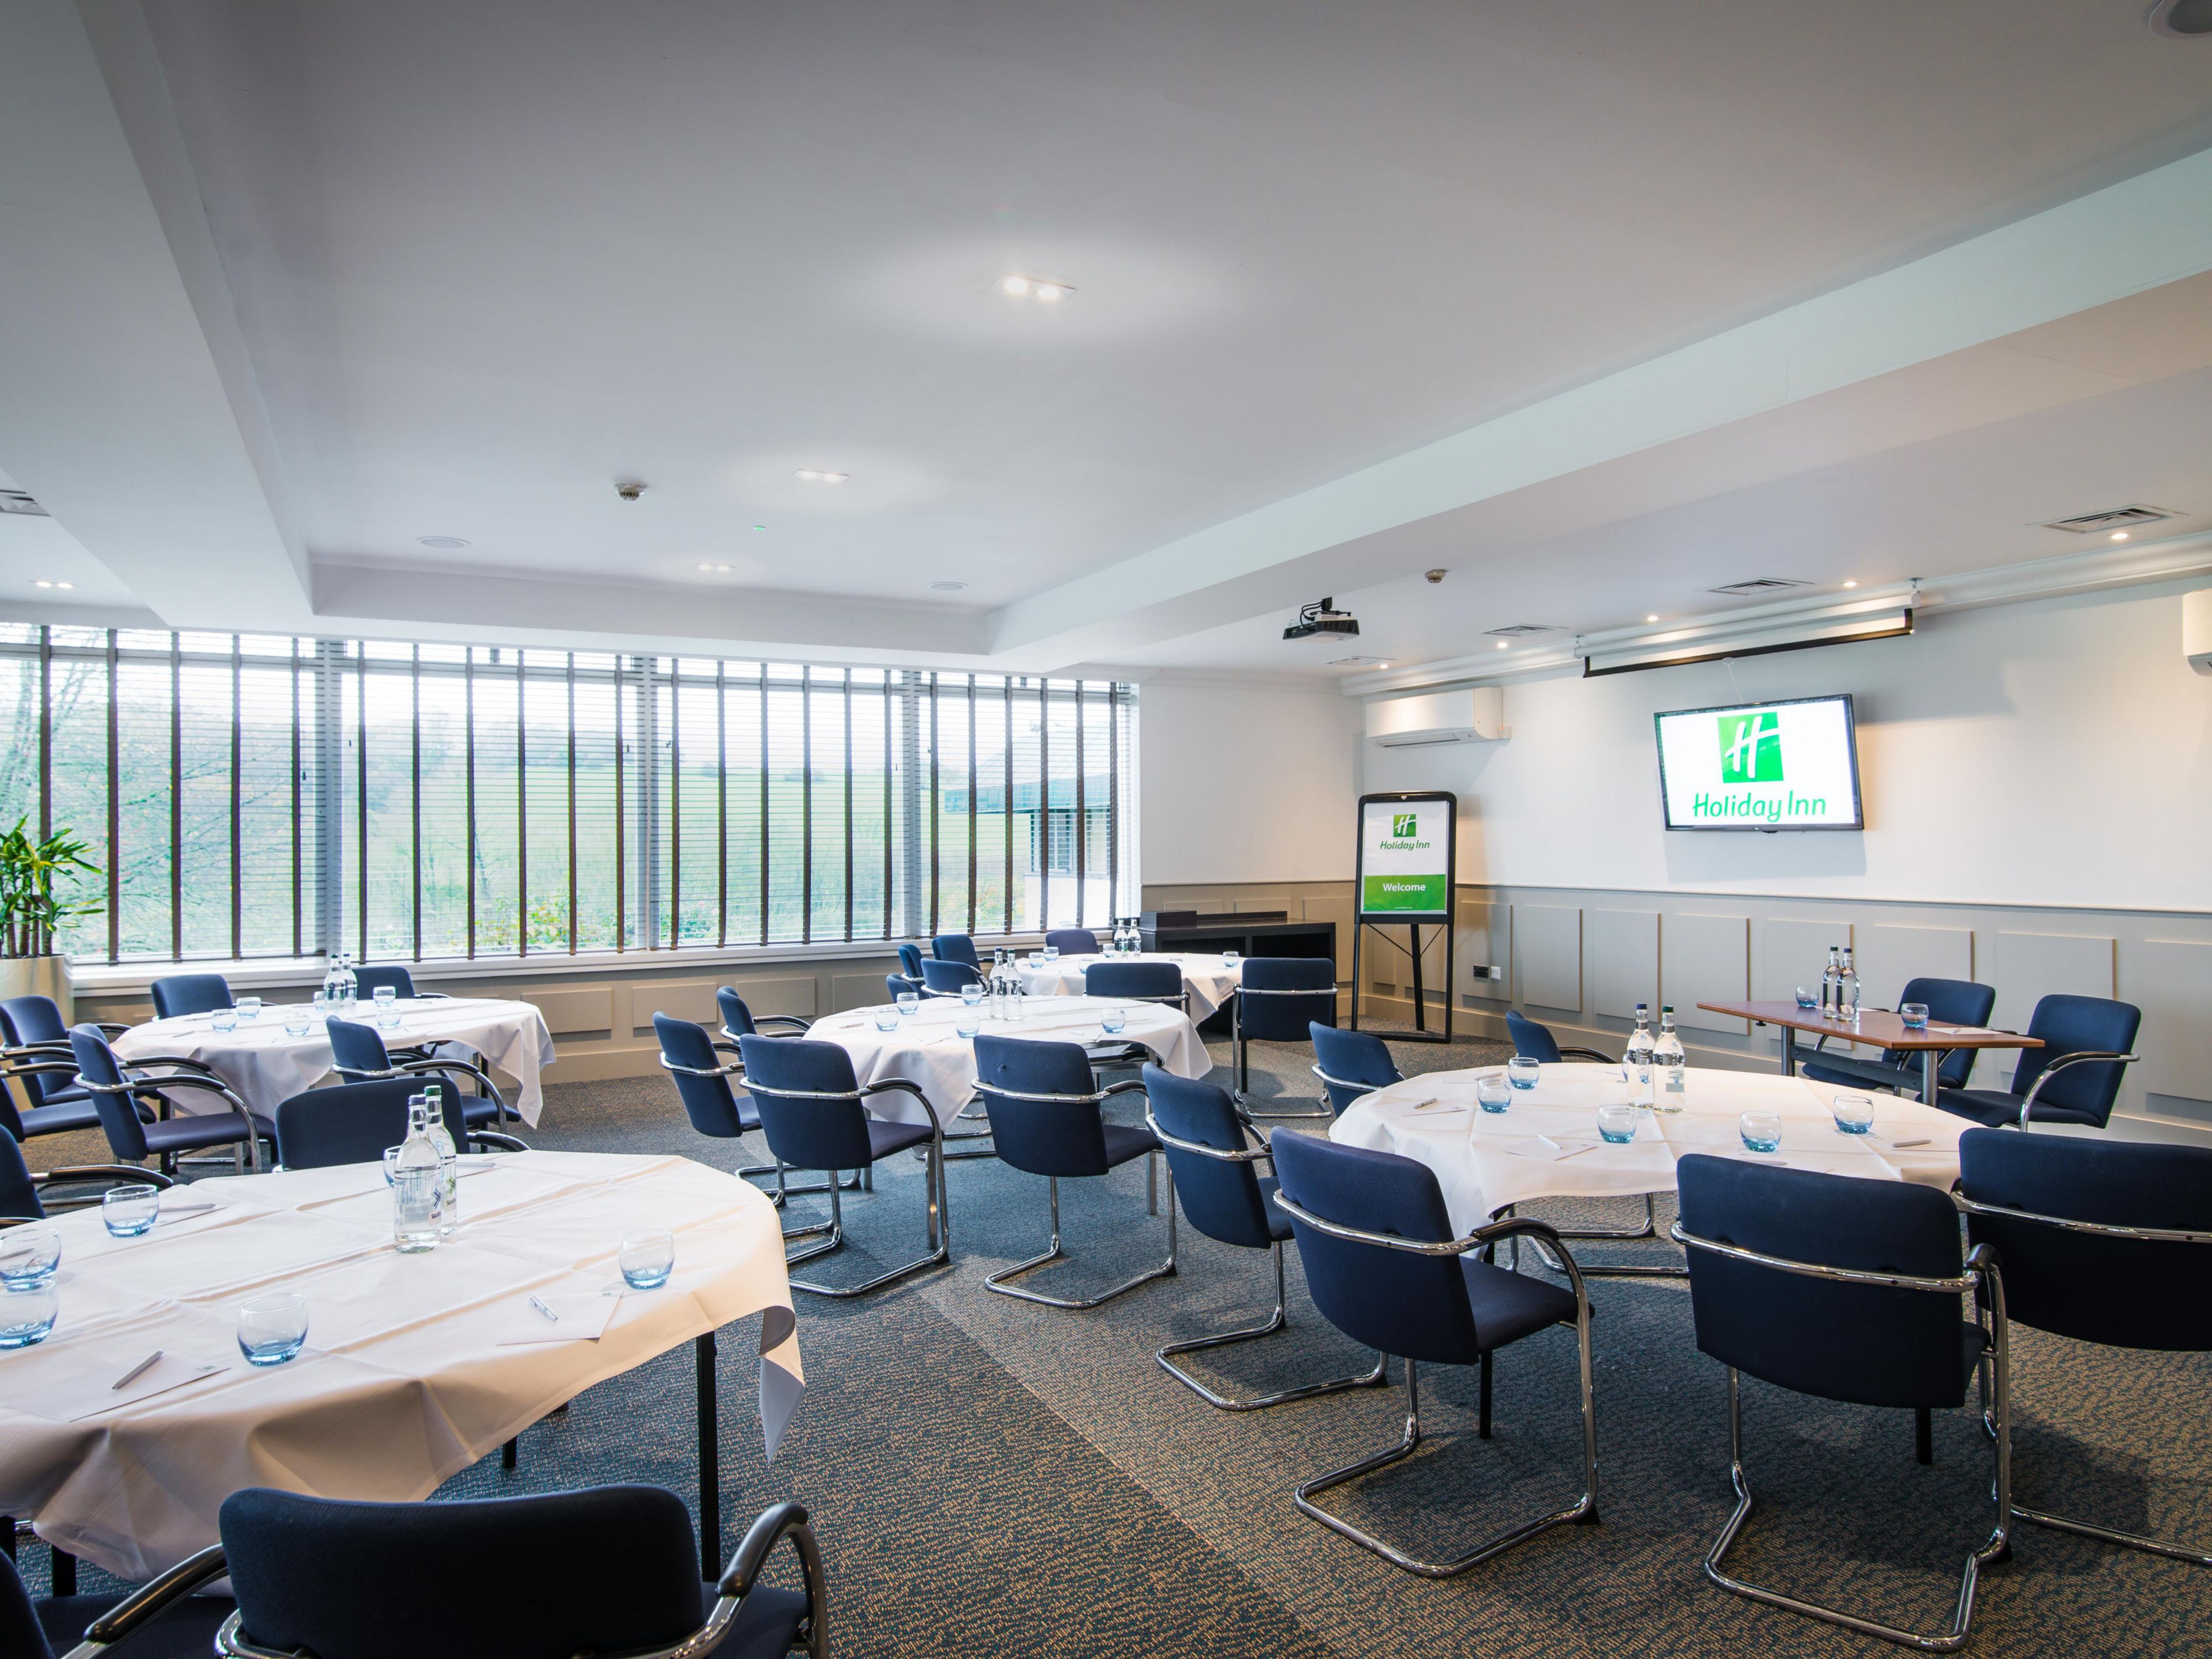 We offer a range of spaces to accommodate large conferences and small meetings. Make your own decisions and build your perfect meetings package.